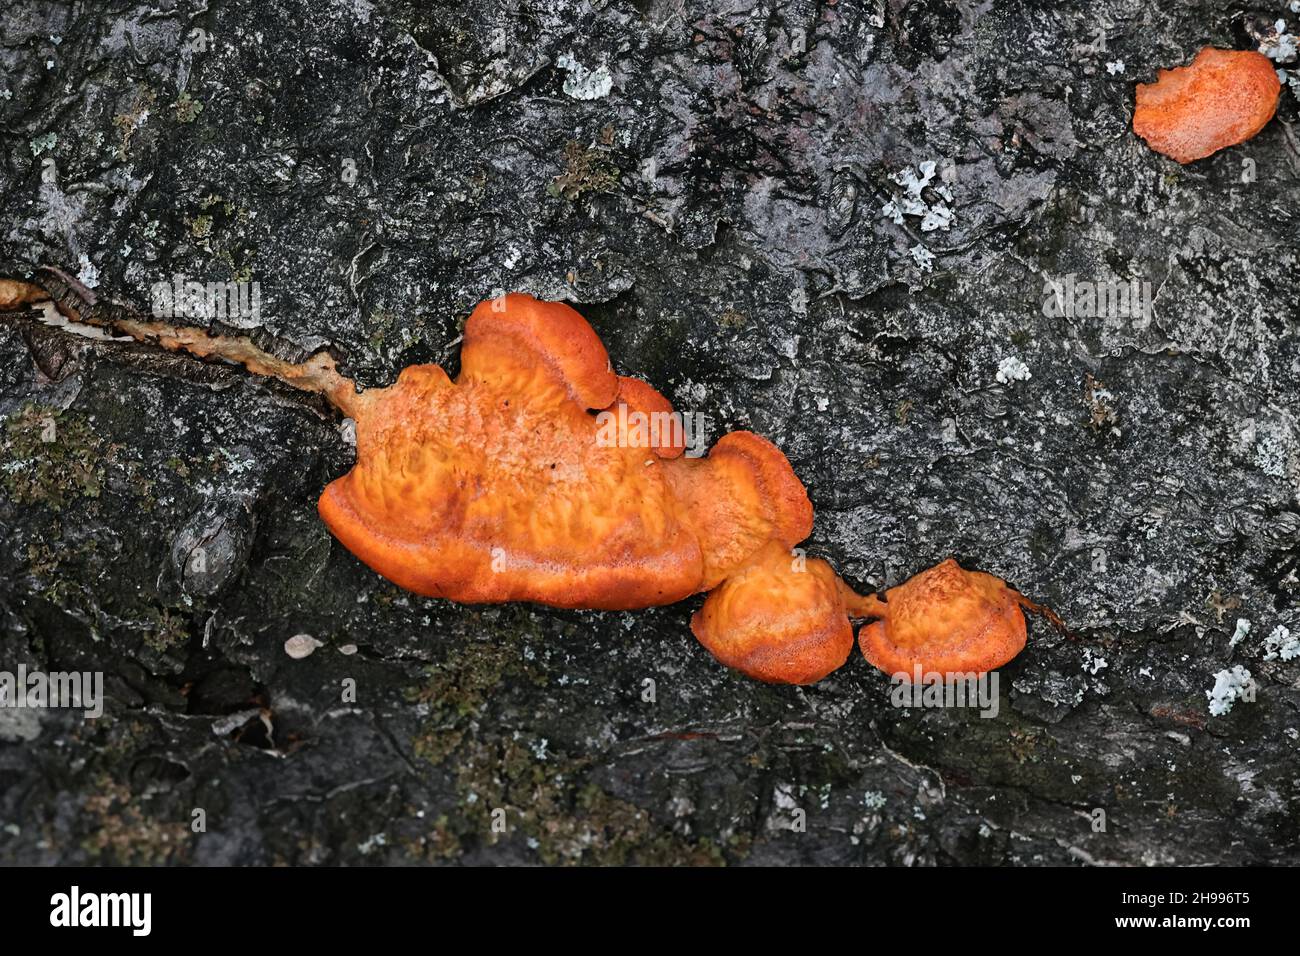 Pycnoporus cinnabarinus, commonly known as the cinnabar polypore, bracket fungus from Finland Stock Photo